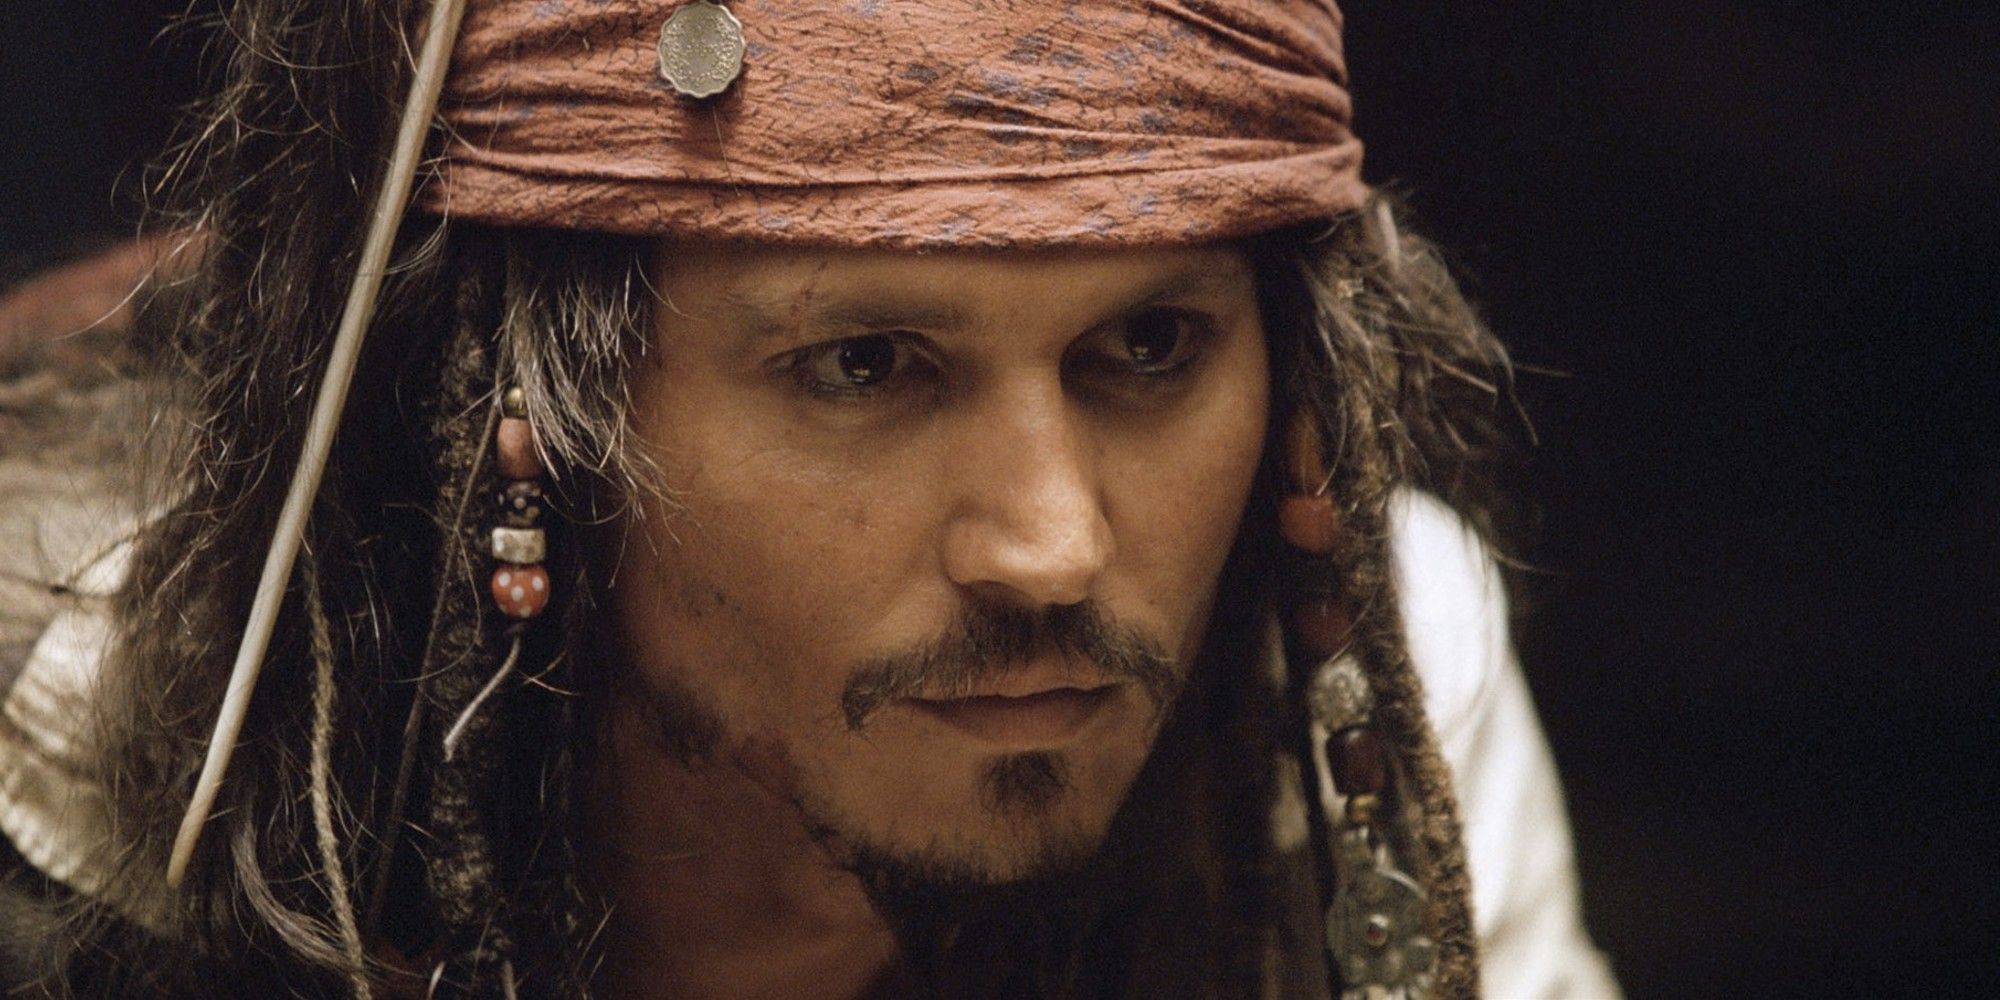 Johnny Depp as Captain Jack Sparrow in 'Pirates of the Caribbean: The Curse of the Black Pearl'